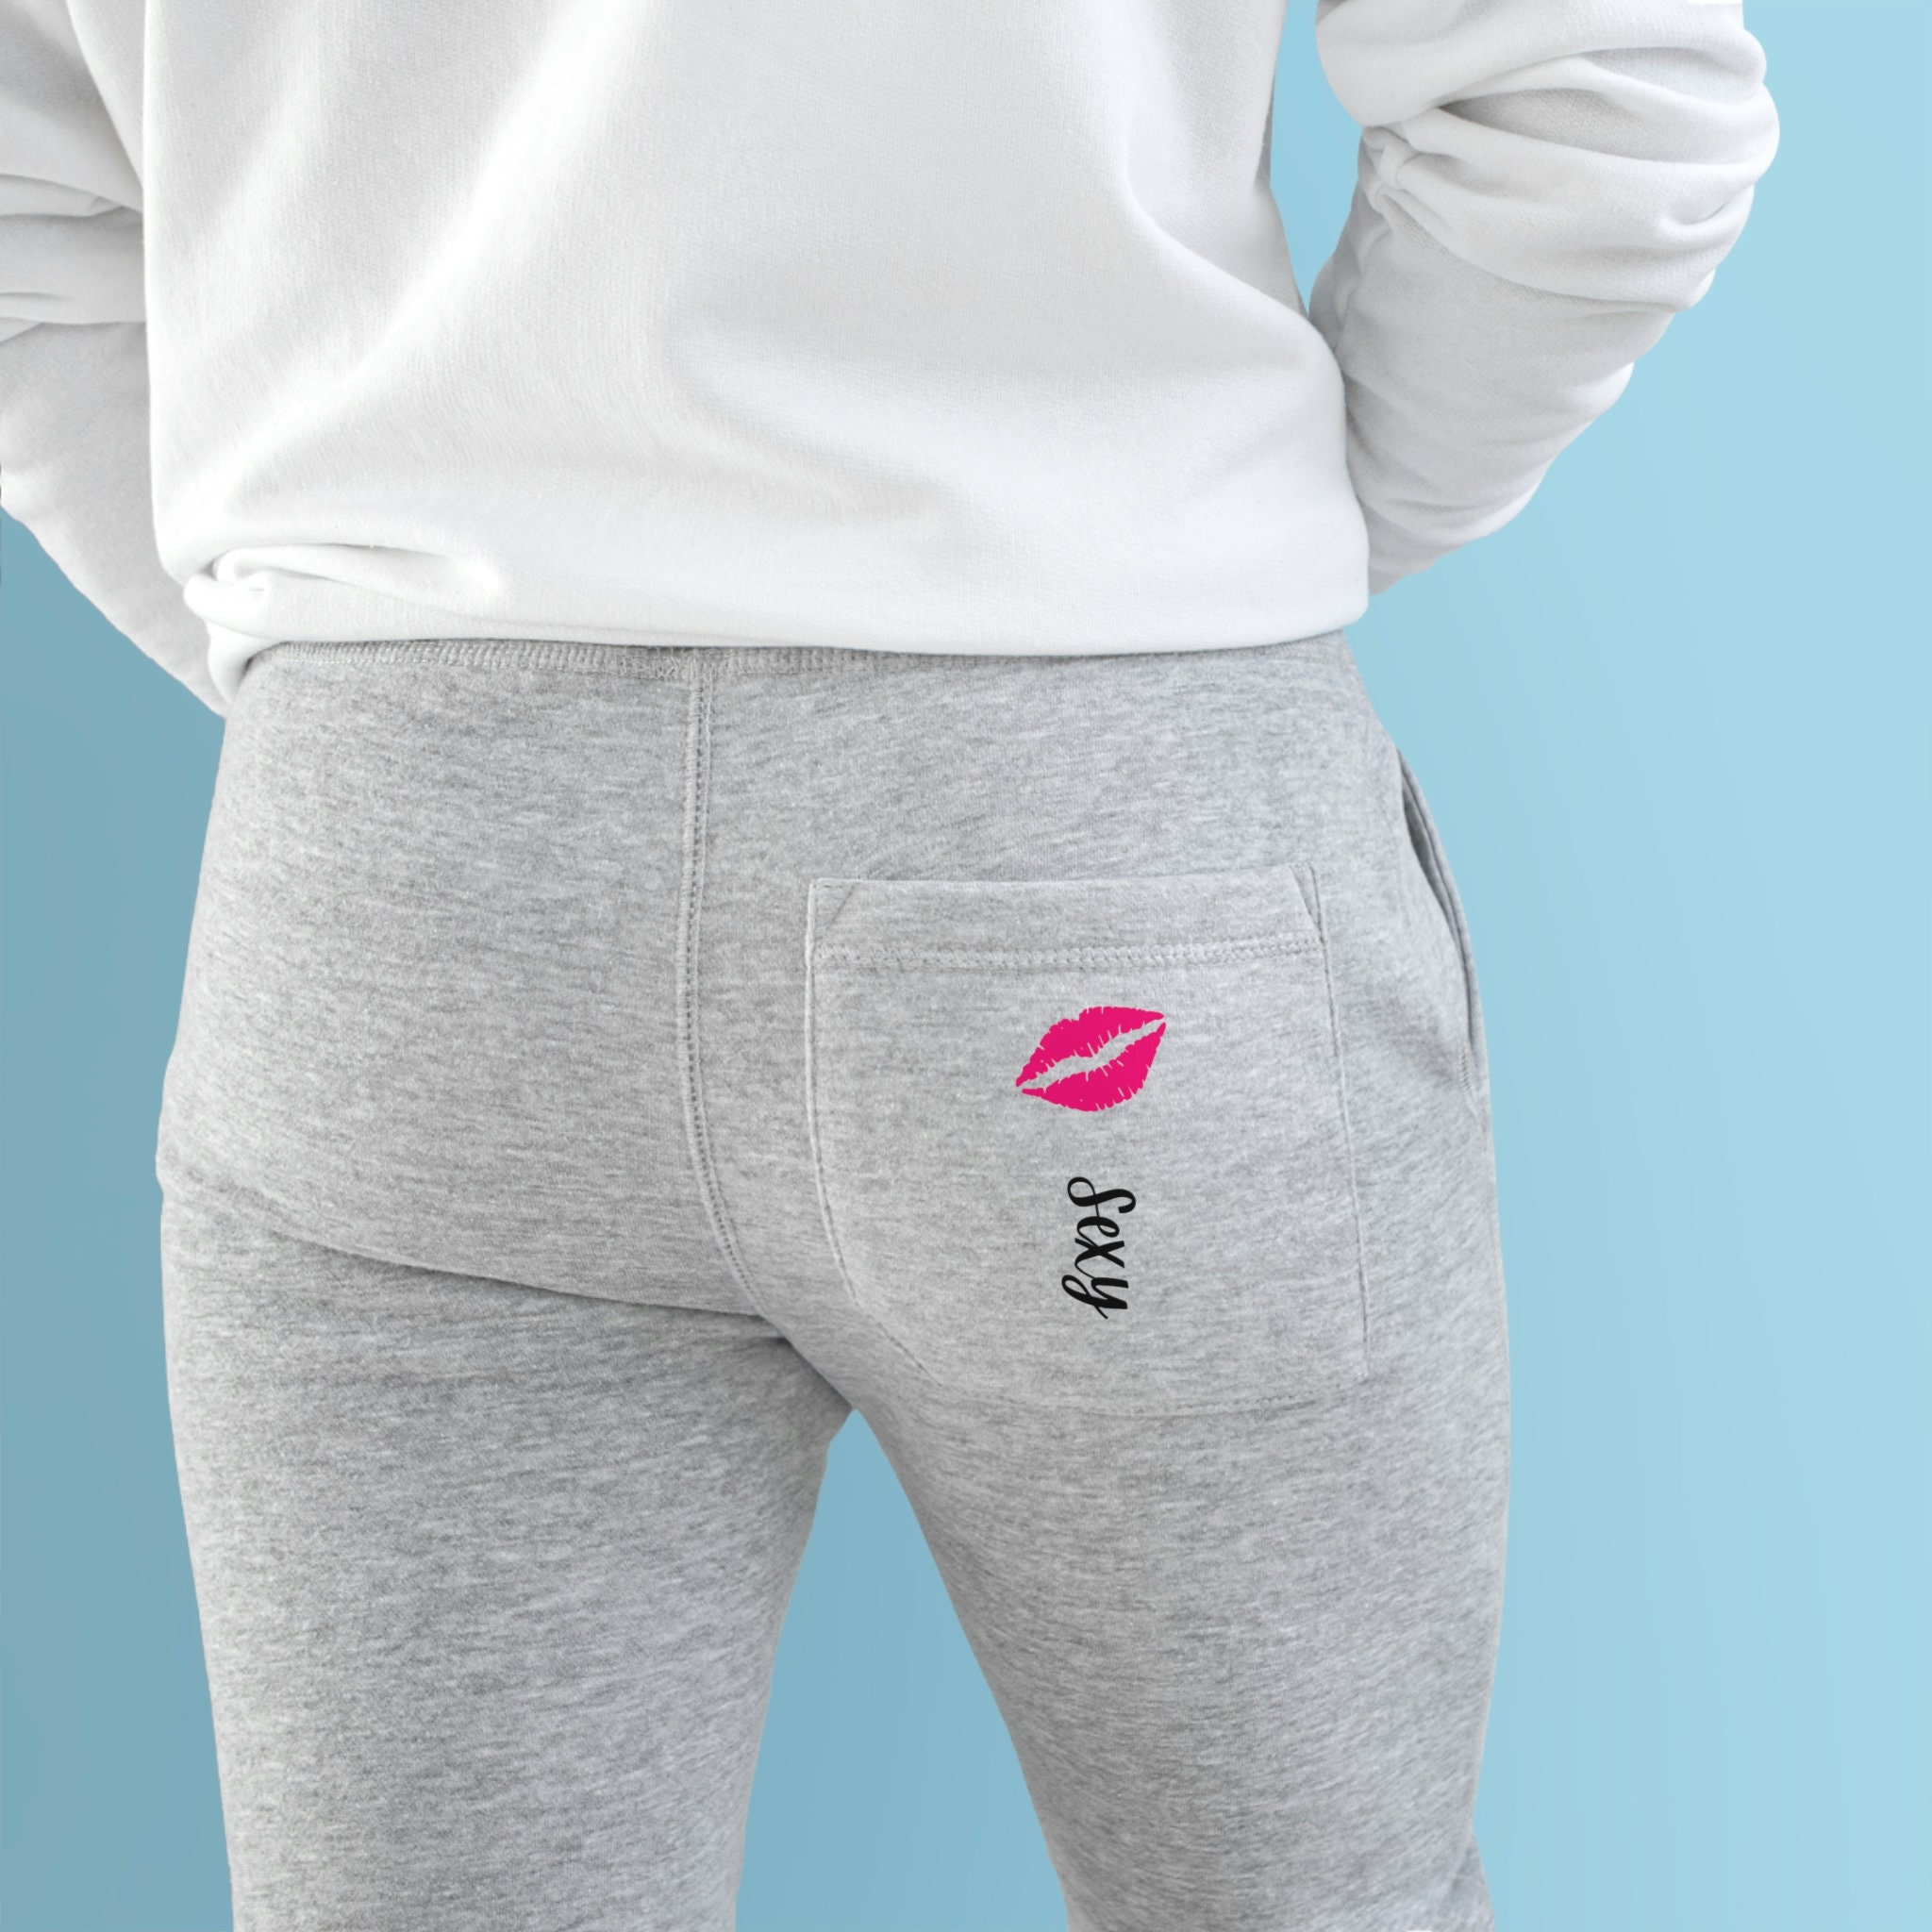 SEXY Fleece Sweatpants Warm and Cozy Perfect for Lounging or Working Out 